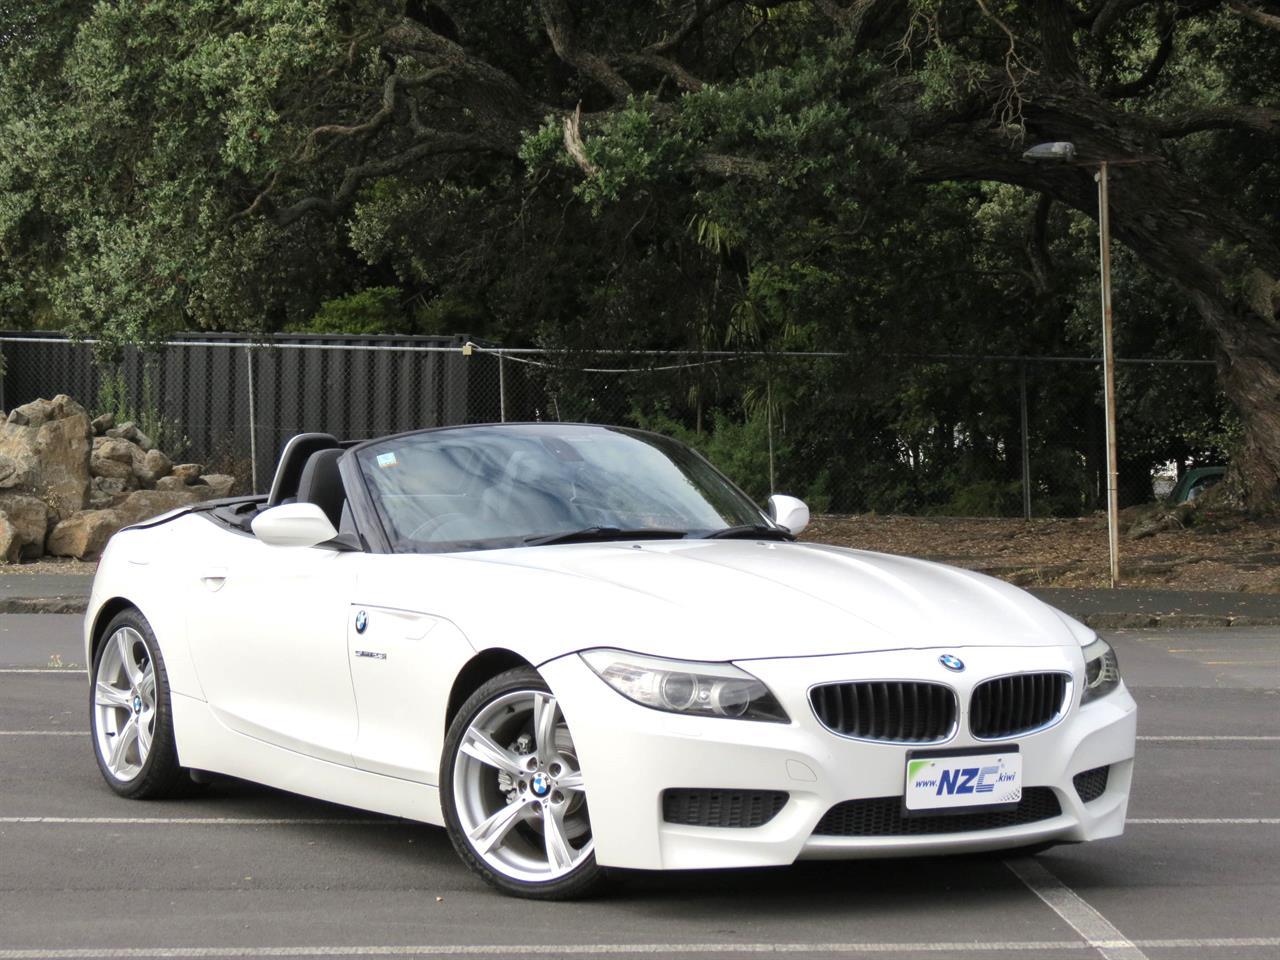 NZC 2010 BMW Z4 just arrived to Auckland